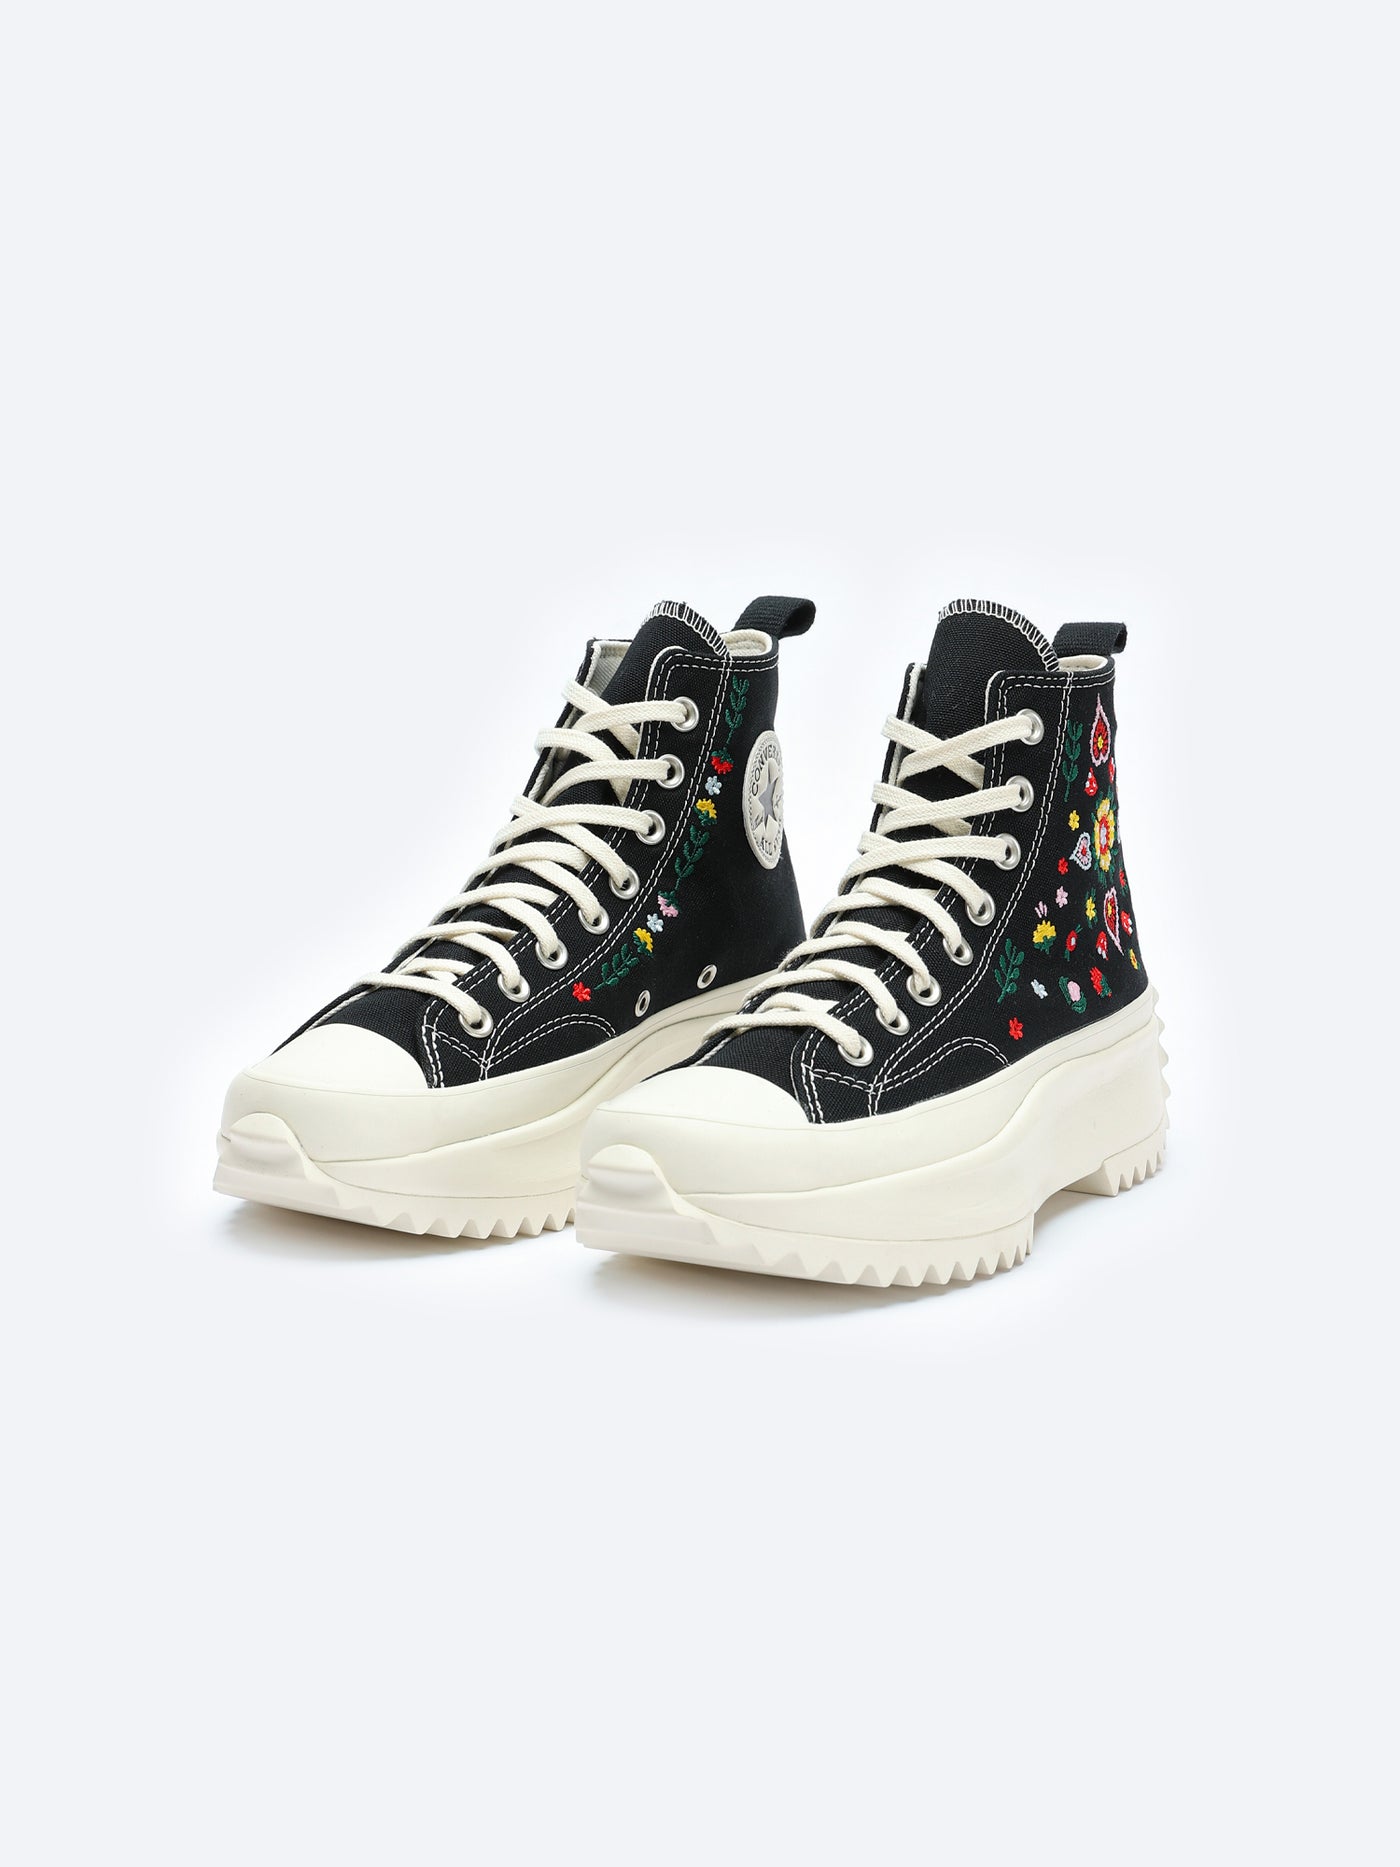 Sneakers - Run Star Hike Hi - Floral Embroidery